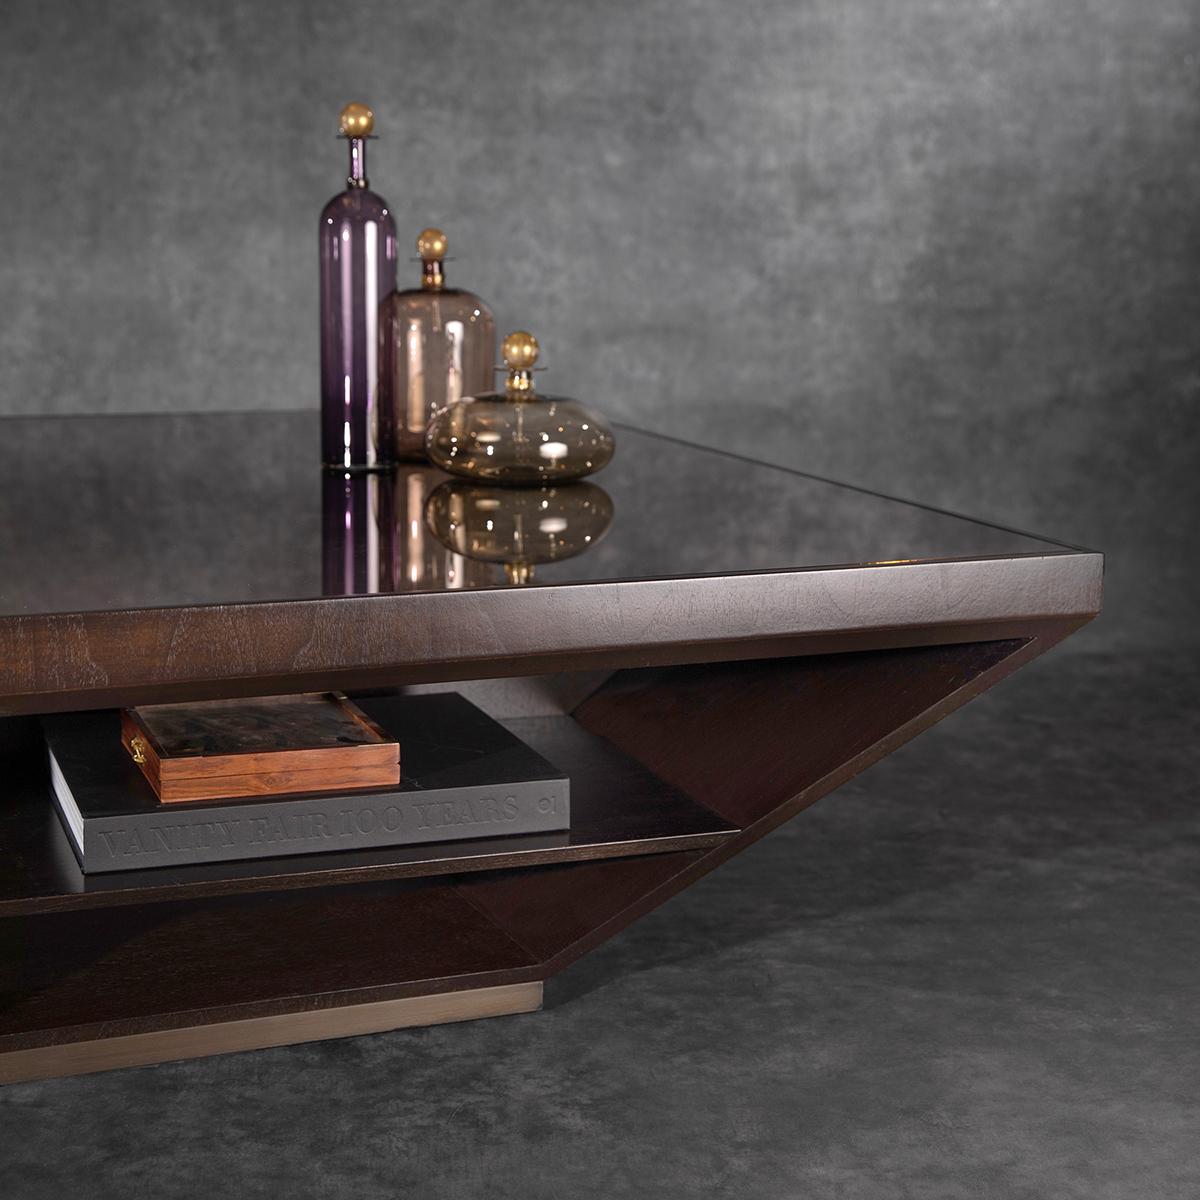 CY Cantilevered cocktail table portrays a dynamic balance on the substantial scale. Hand-crafted Dark Stained Walnut and Darkened Bronze Base with a Bronze Mirrored Glass Tabletop Insert is a creation of CY design team. This beautiful modern style